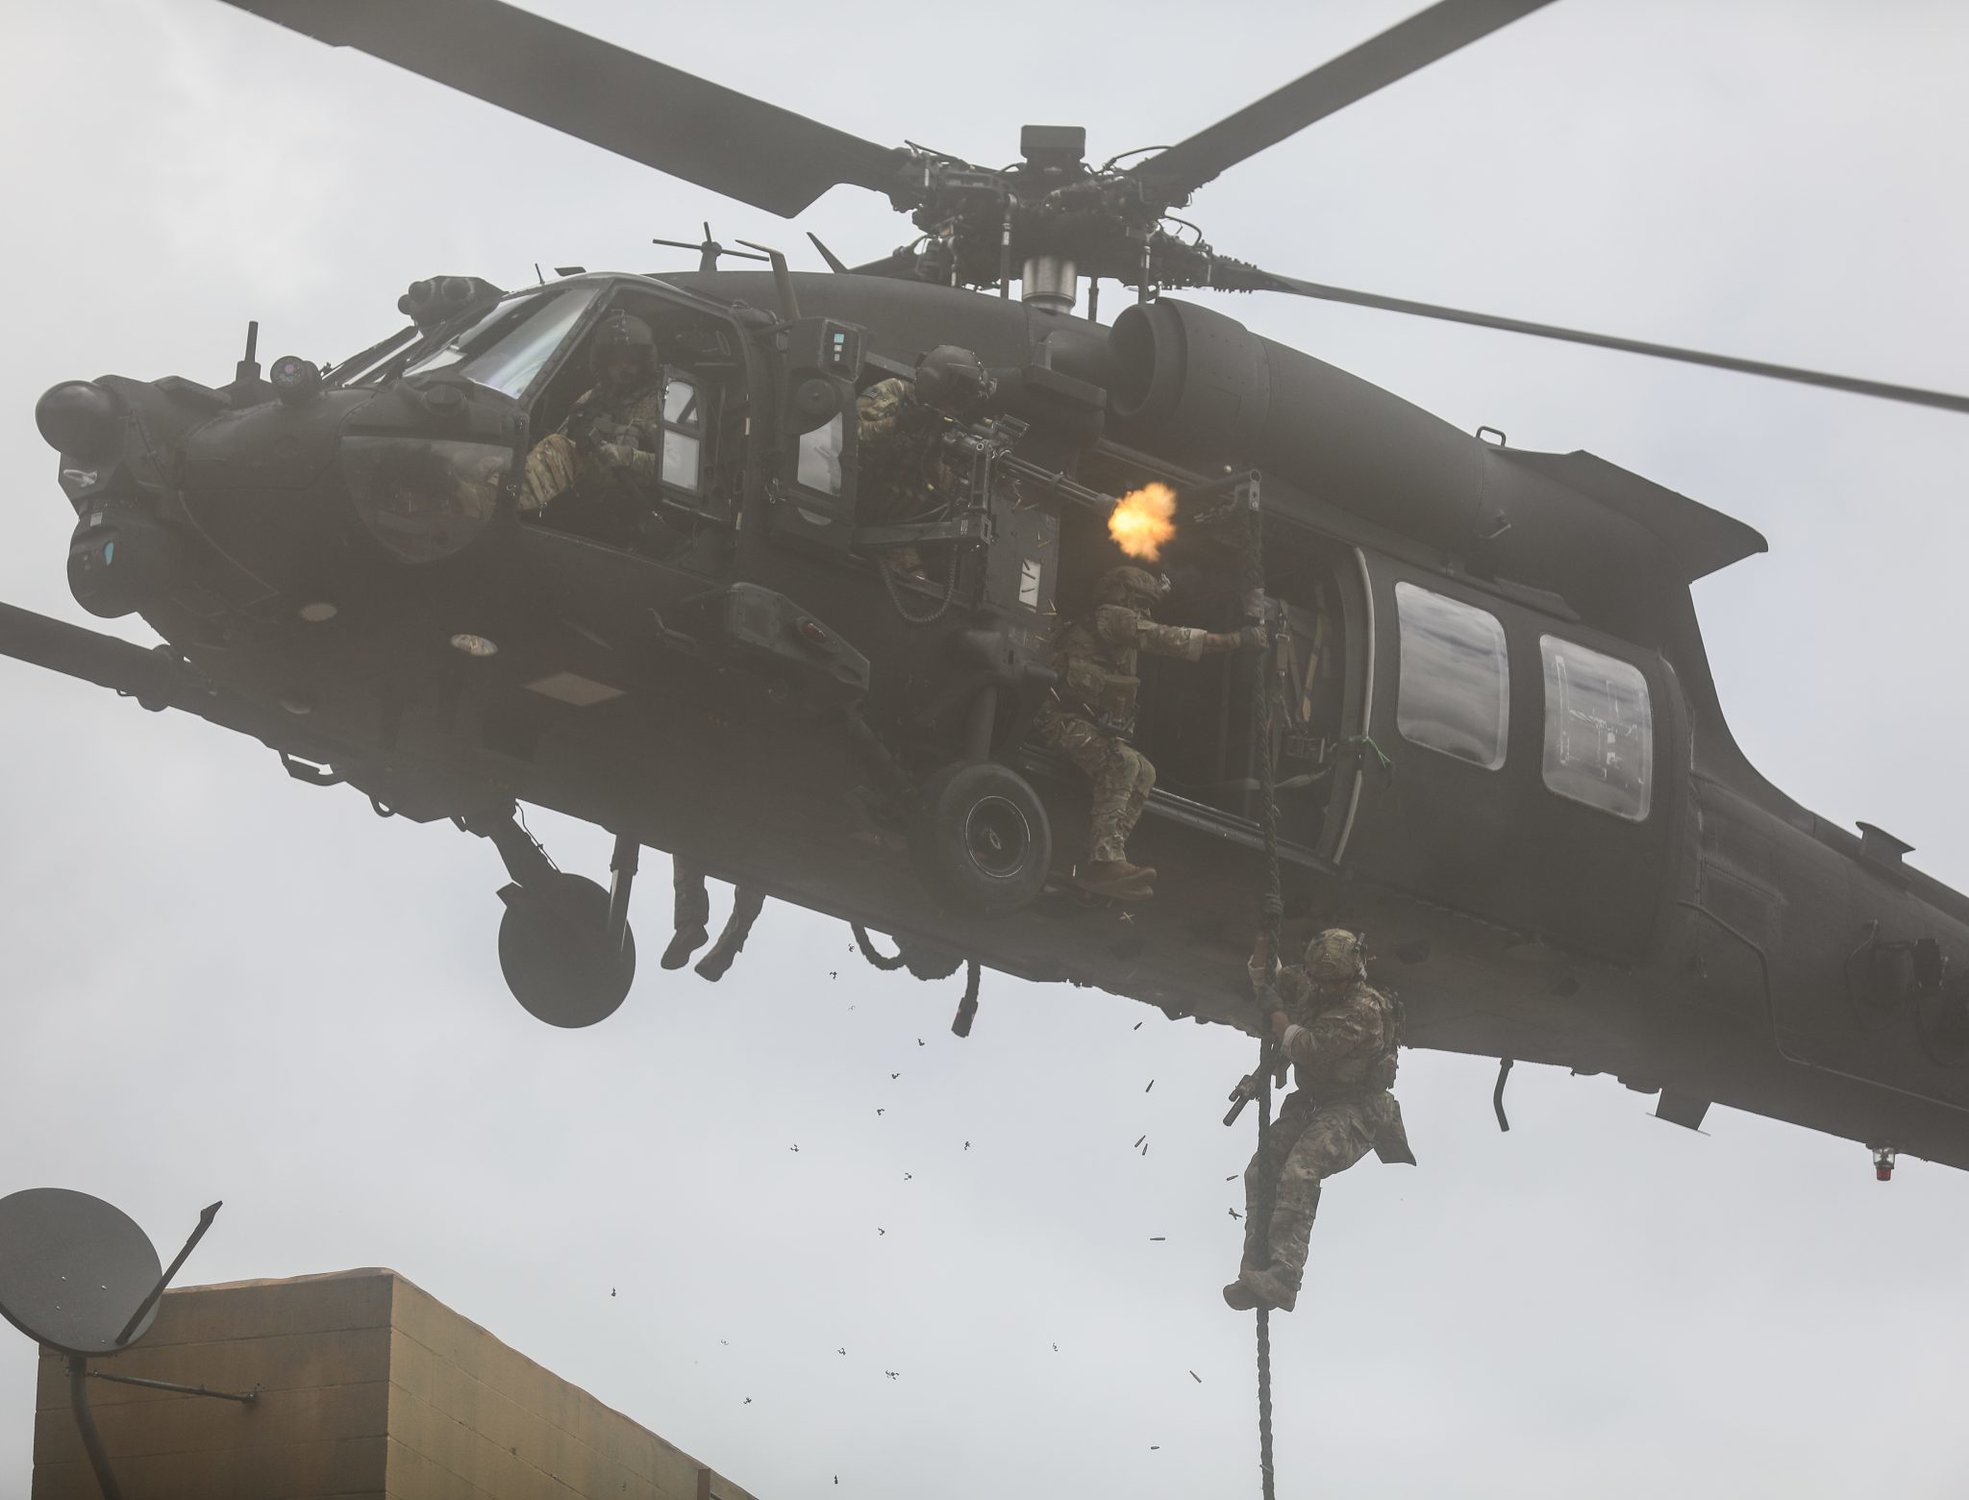 U.S. Army Rangers from 75th Ranger Regiment fast-rope onto buildings in support of the Army Marketing Research Group’s “Warriors Wanted” campaign at Fort Campbell, Ky, on July 22, 2018. Image Used in the Special Operations Recruiting Battalion Campaign.